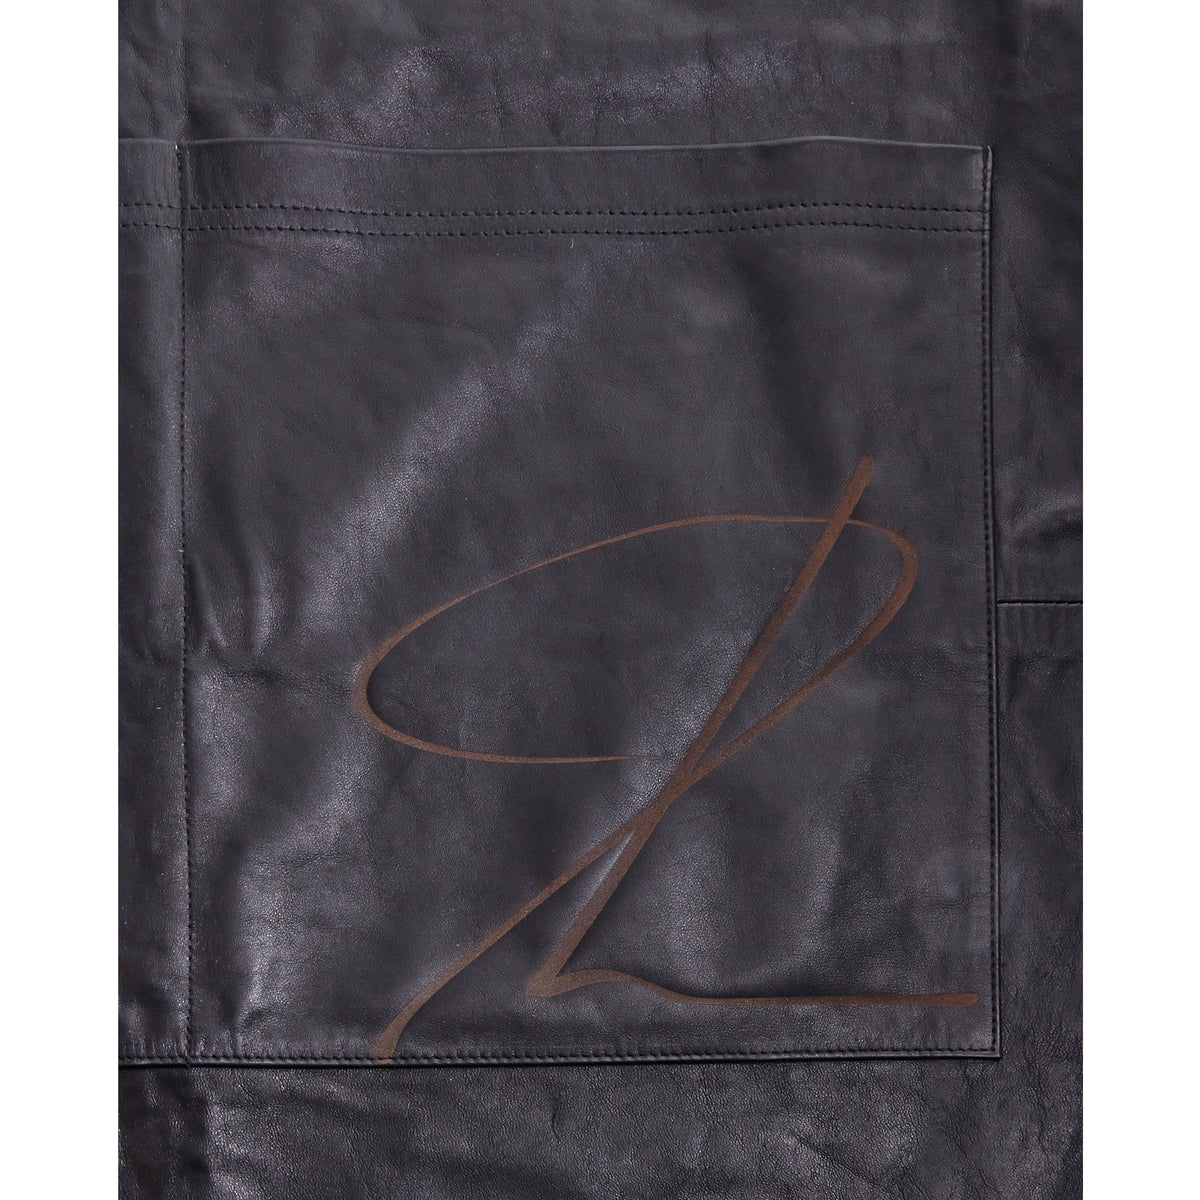 Leather Apron with Personalization